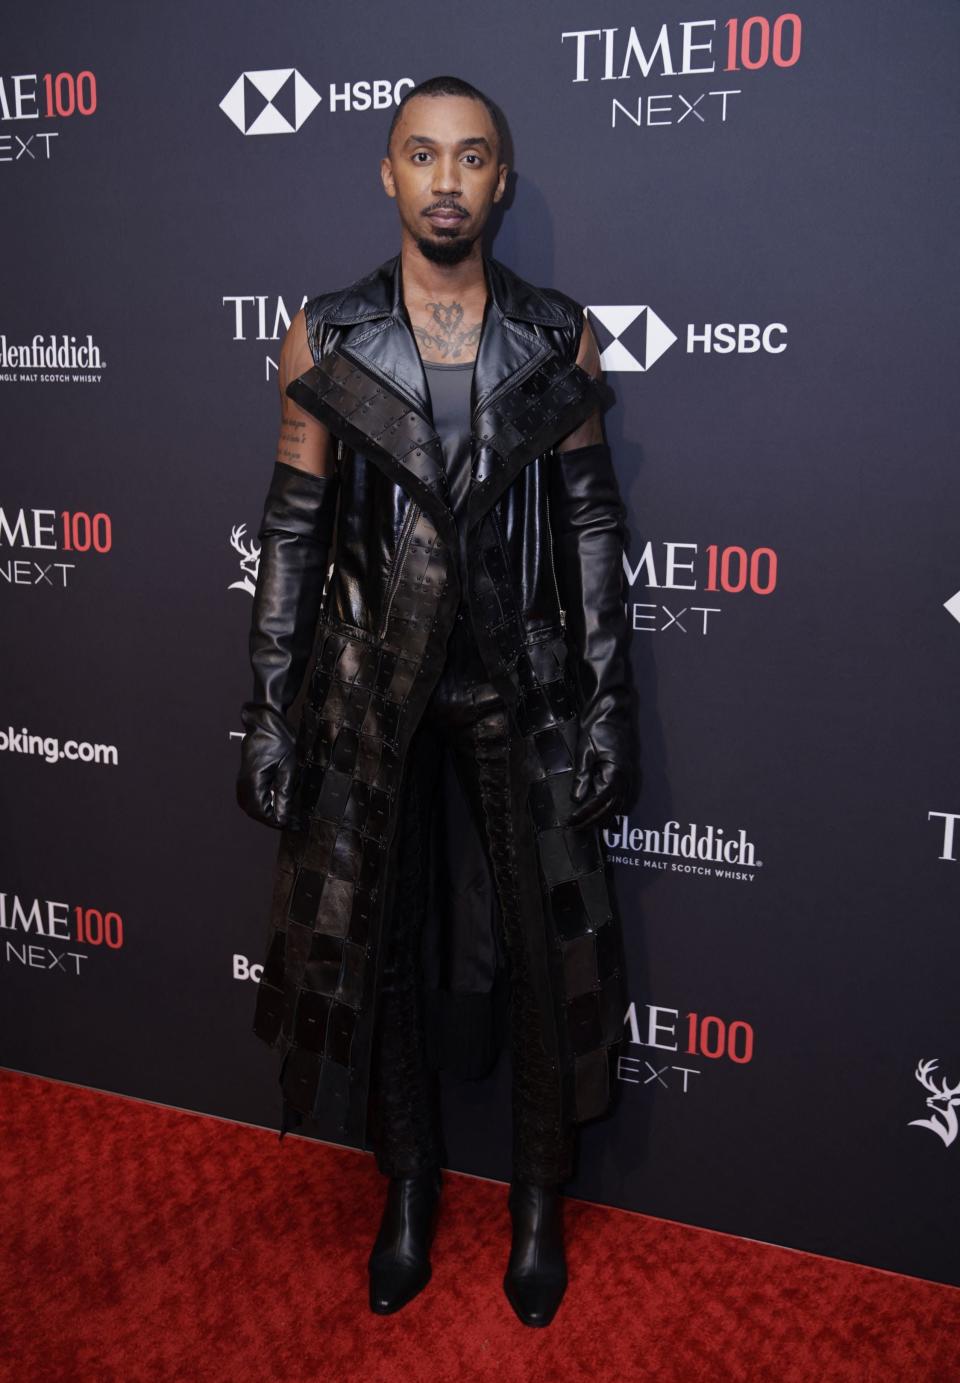 George in a detailed leather coat posing on the red carpet